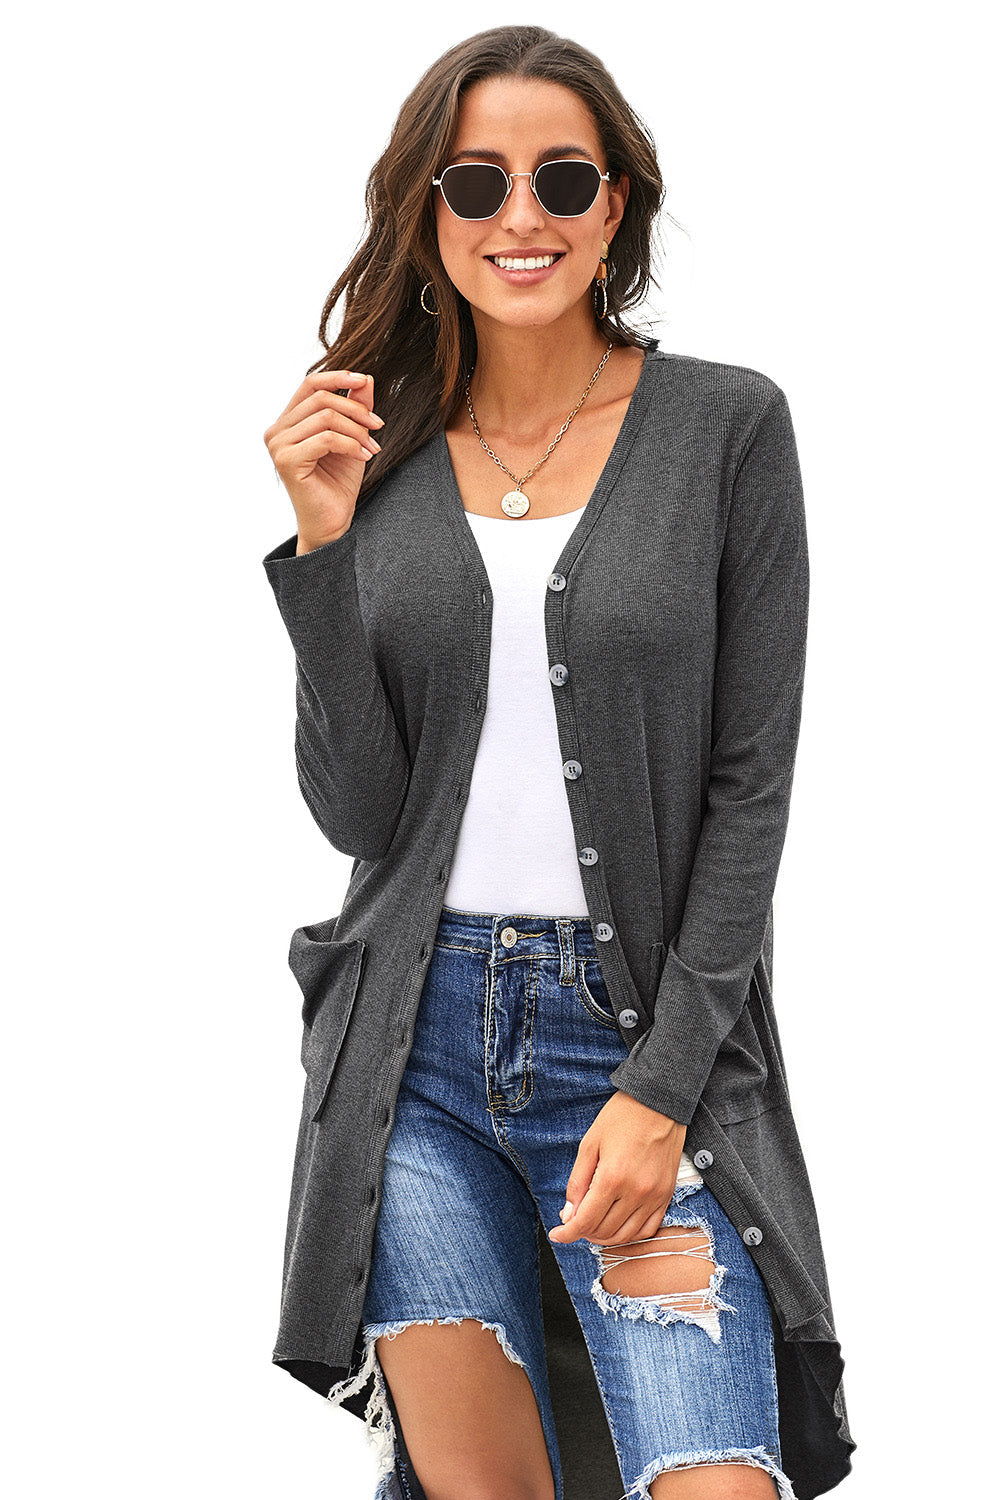 V-Neck Long Sleeve Cardigan with Pocket - Women’s Clothing & Accessories - Shirts & Tops - 6 - 2024